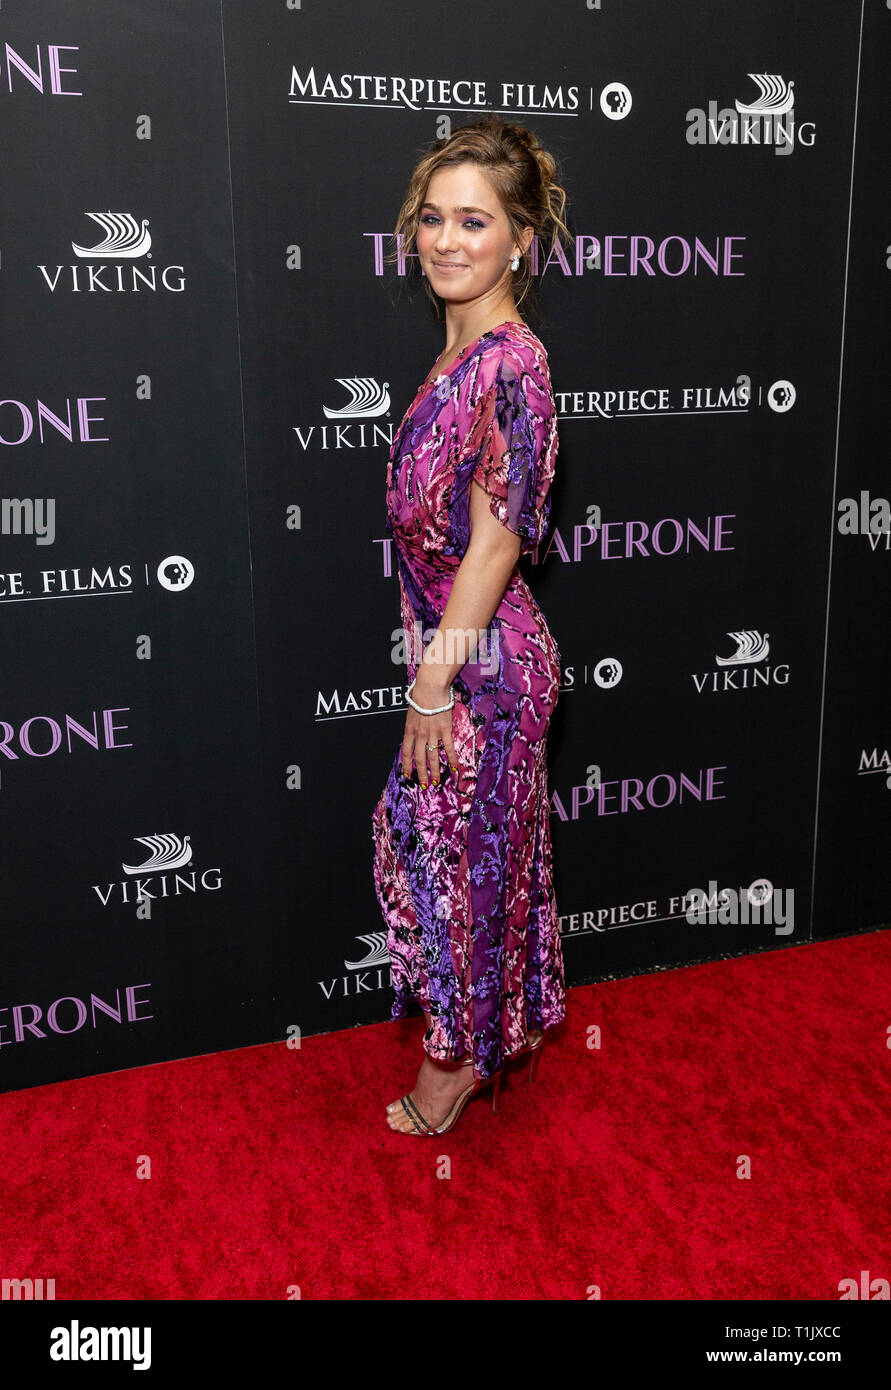 New York, United States. 25th Mar, 2019. NEW YORK, NY - MARCH 25: Haley Lu Richardson attends 'The Chaperone' New York Premiere at Museum of Modern Art on March 25, 2019 in New York City. Credit: Ron Adar/Alamy Live News Stock Photo